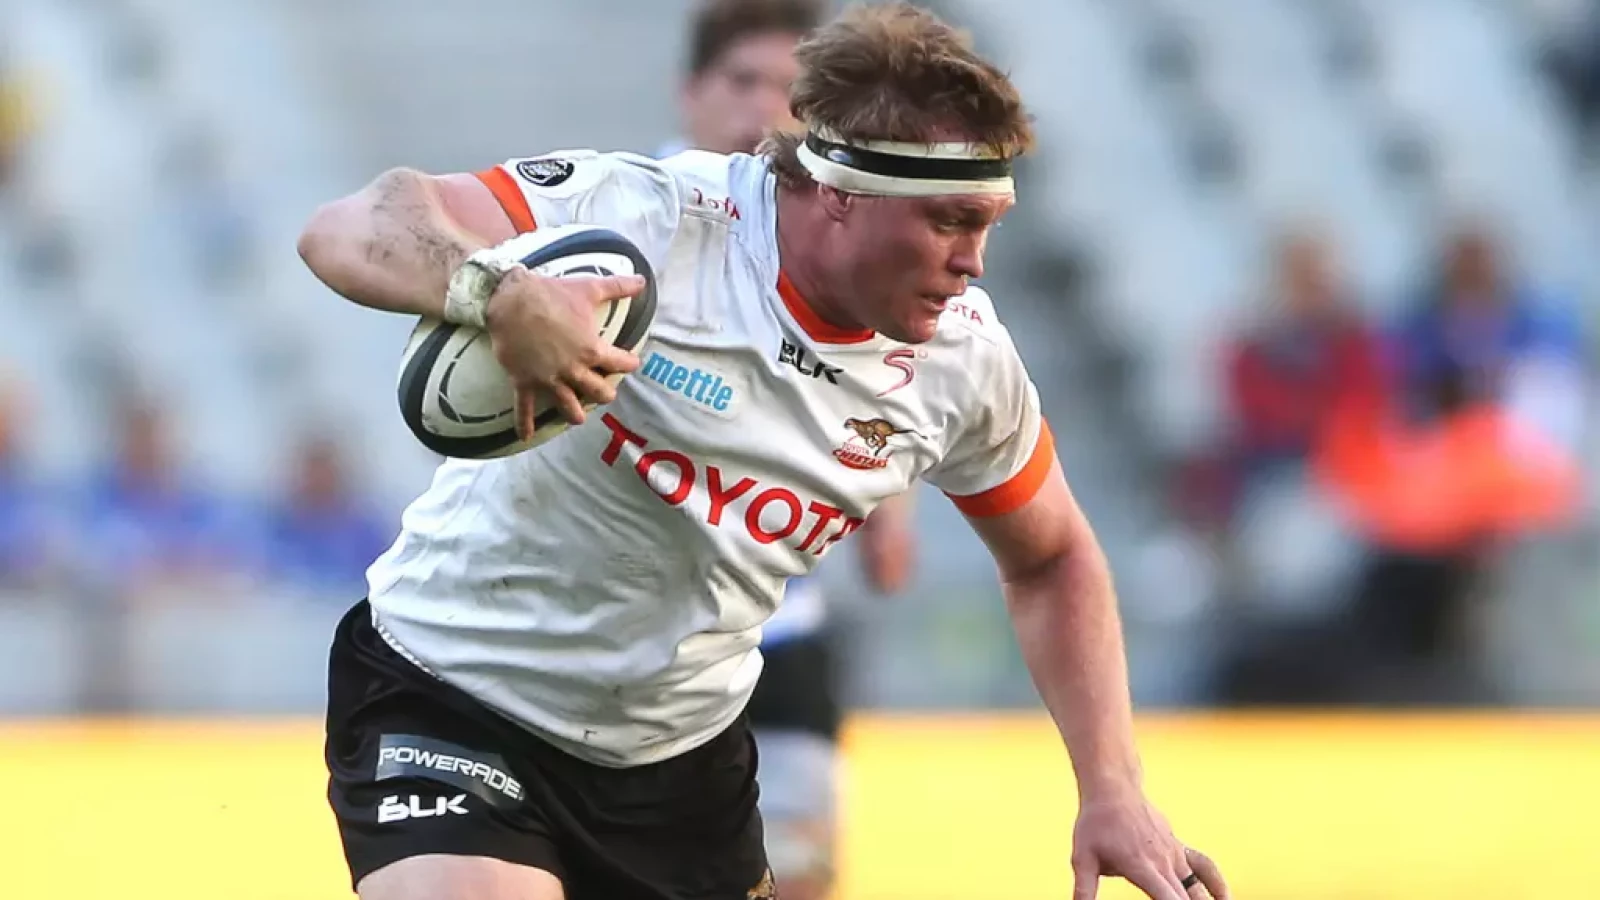 Currie Cup Free State Cheetahs come from behind to beat Western Province rugby